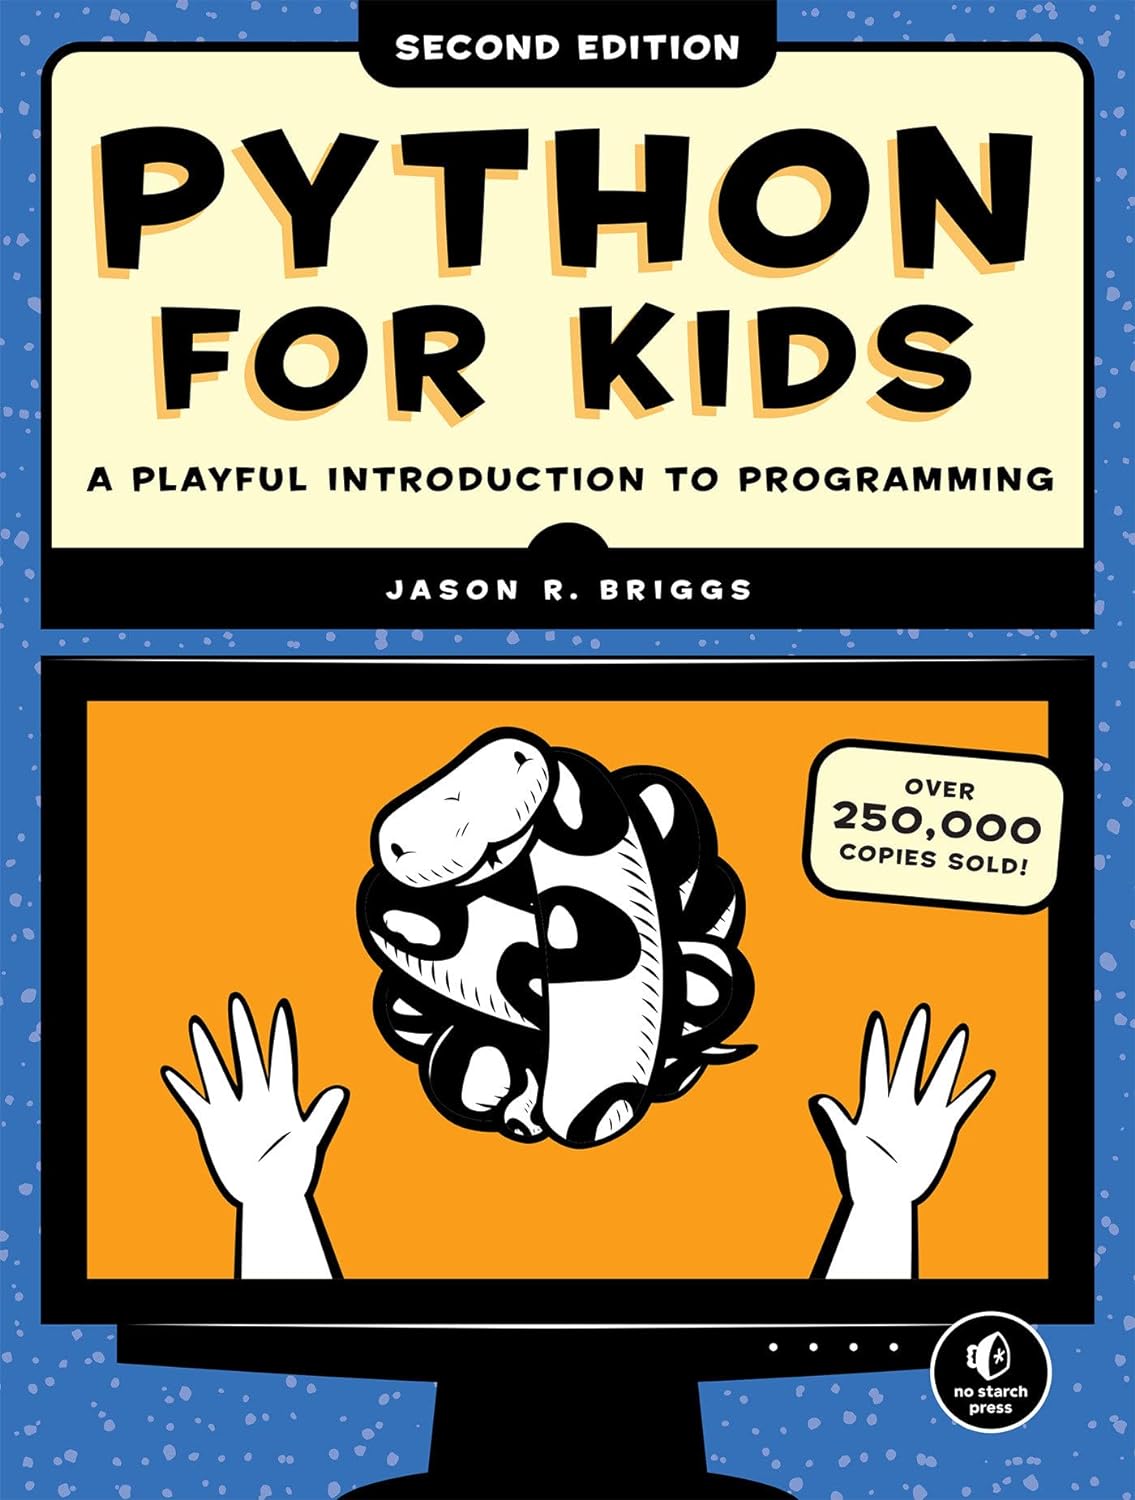 Python for Kids, 2nd Edition: A Playful Introduction to Programming by Jason R. Briggs 